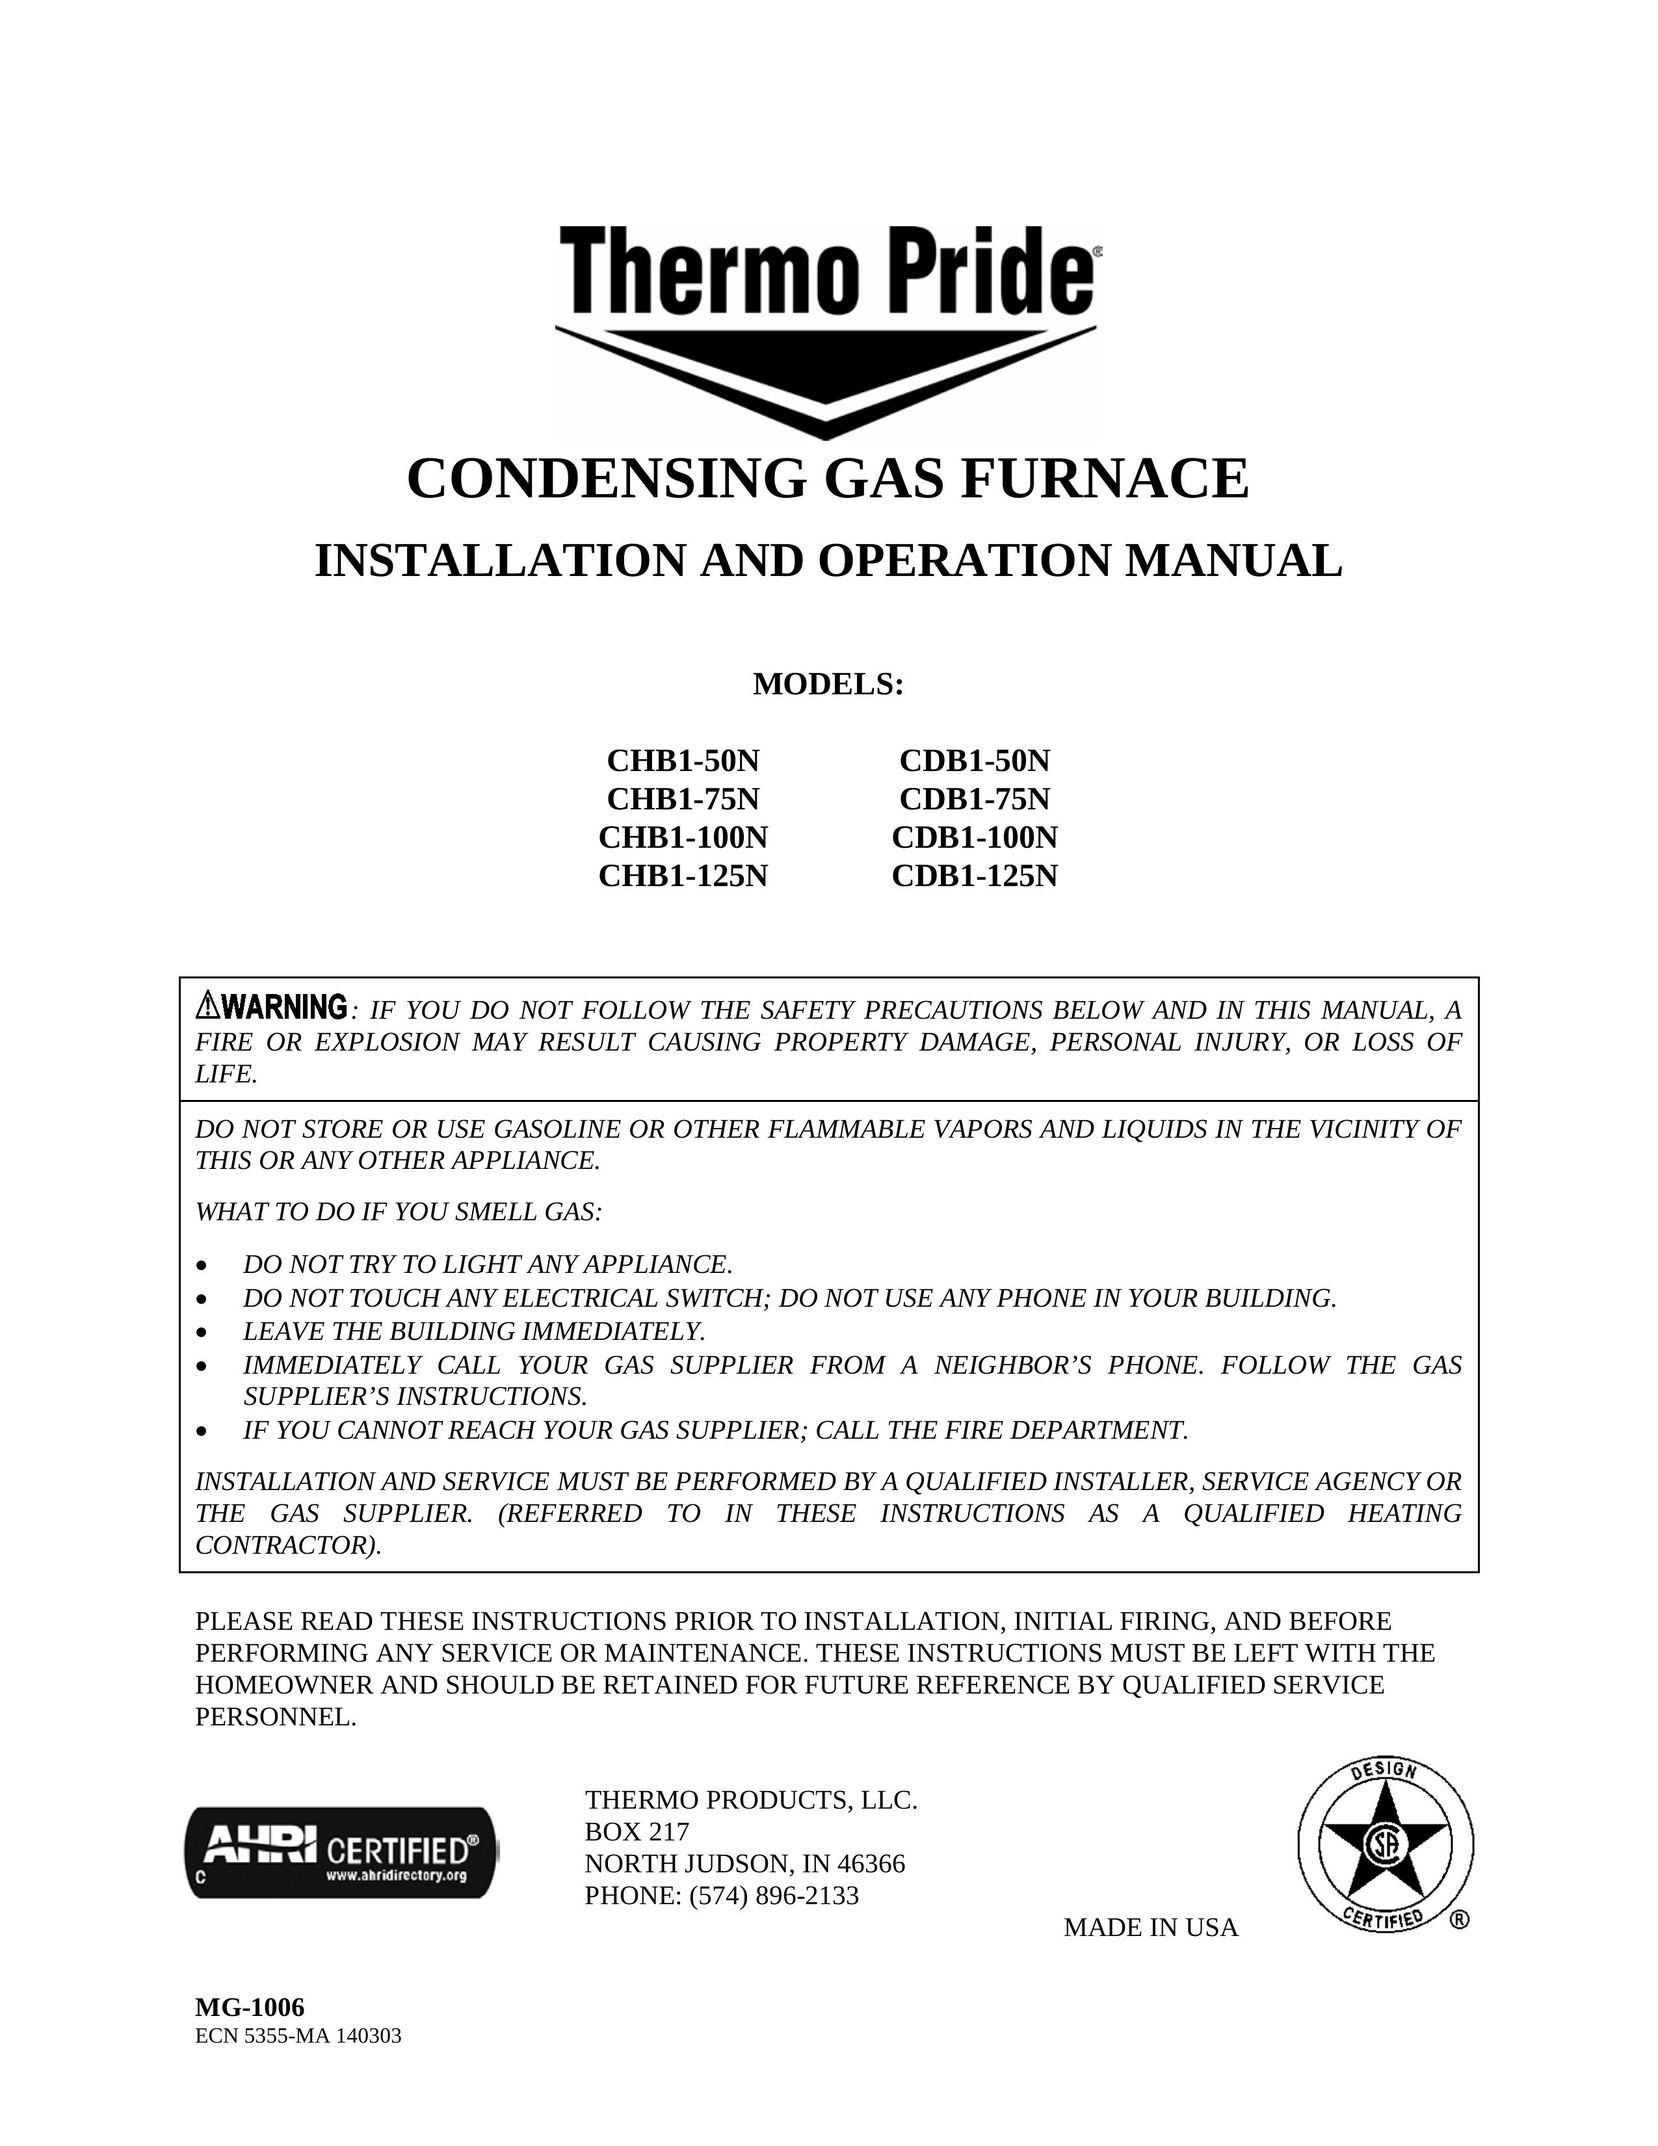 Thermo Products CHB1-75N Furnace User Manual